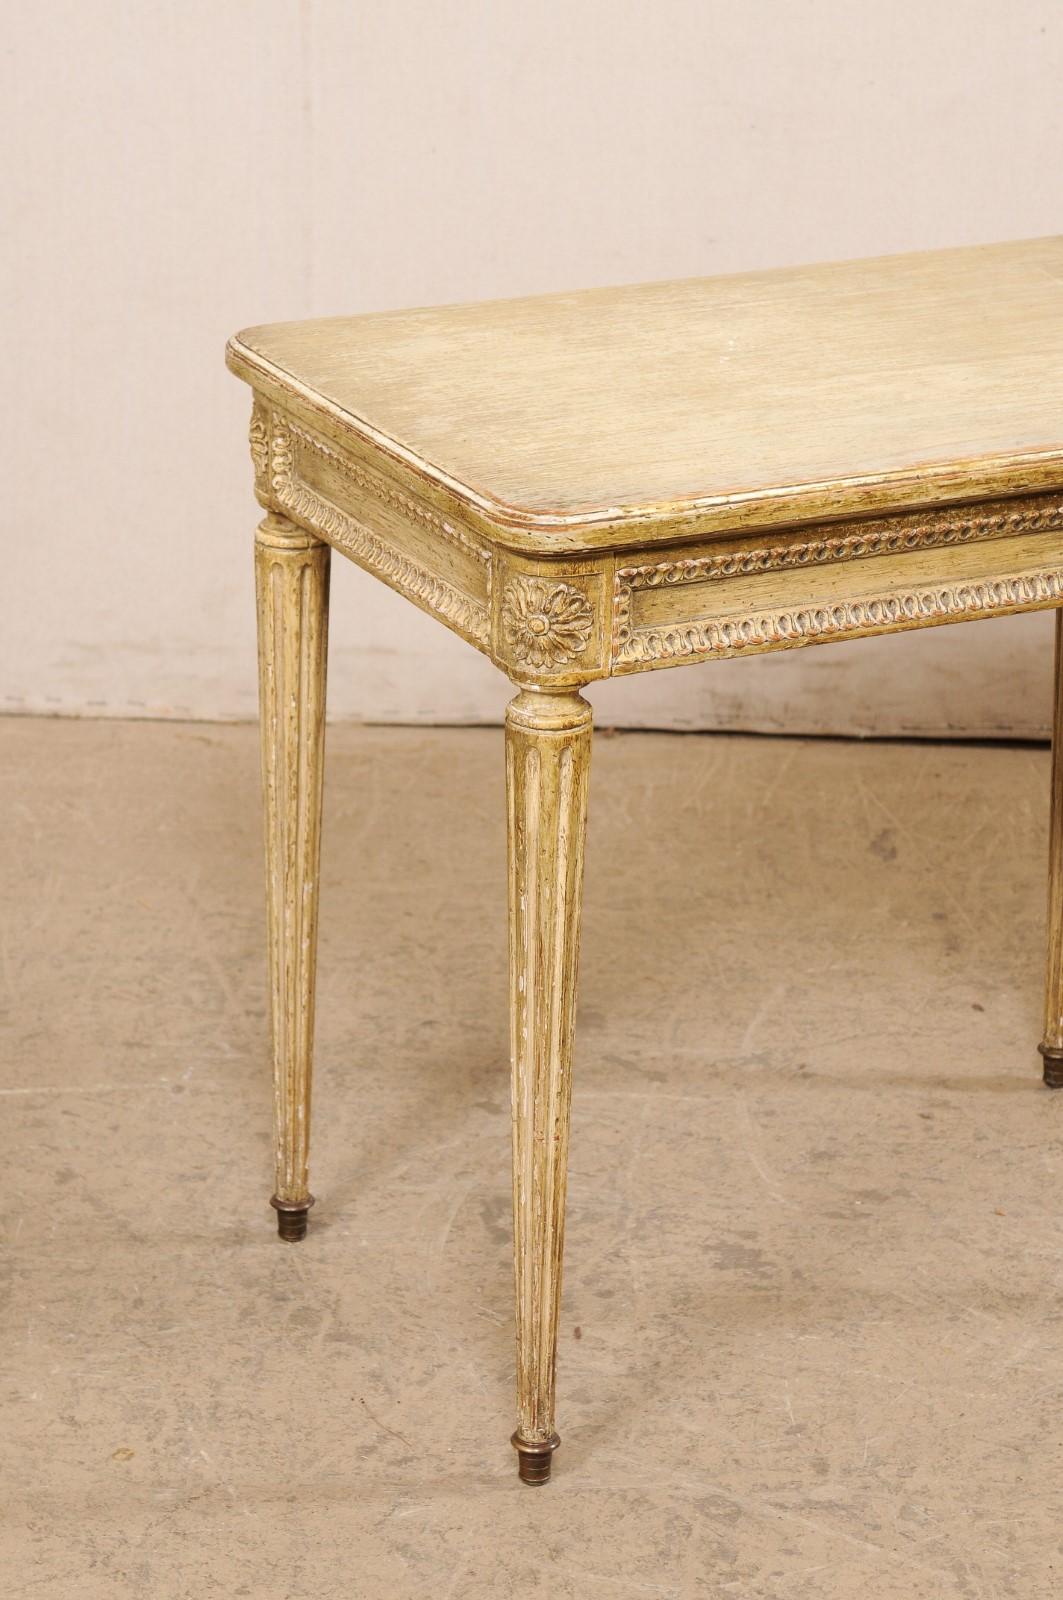 Louis XVI Style French Side Table with its Original Painted Finish Early 20th C. In Good Condition For Sale In Atlanta, GA